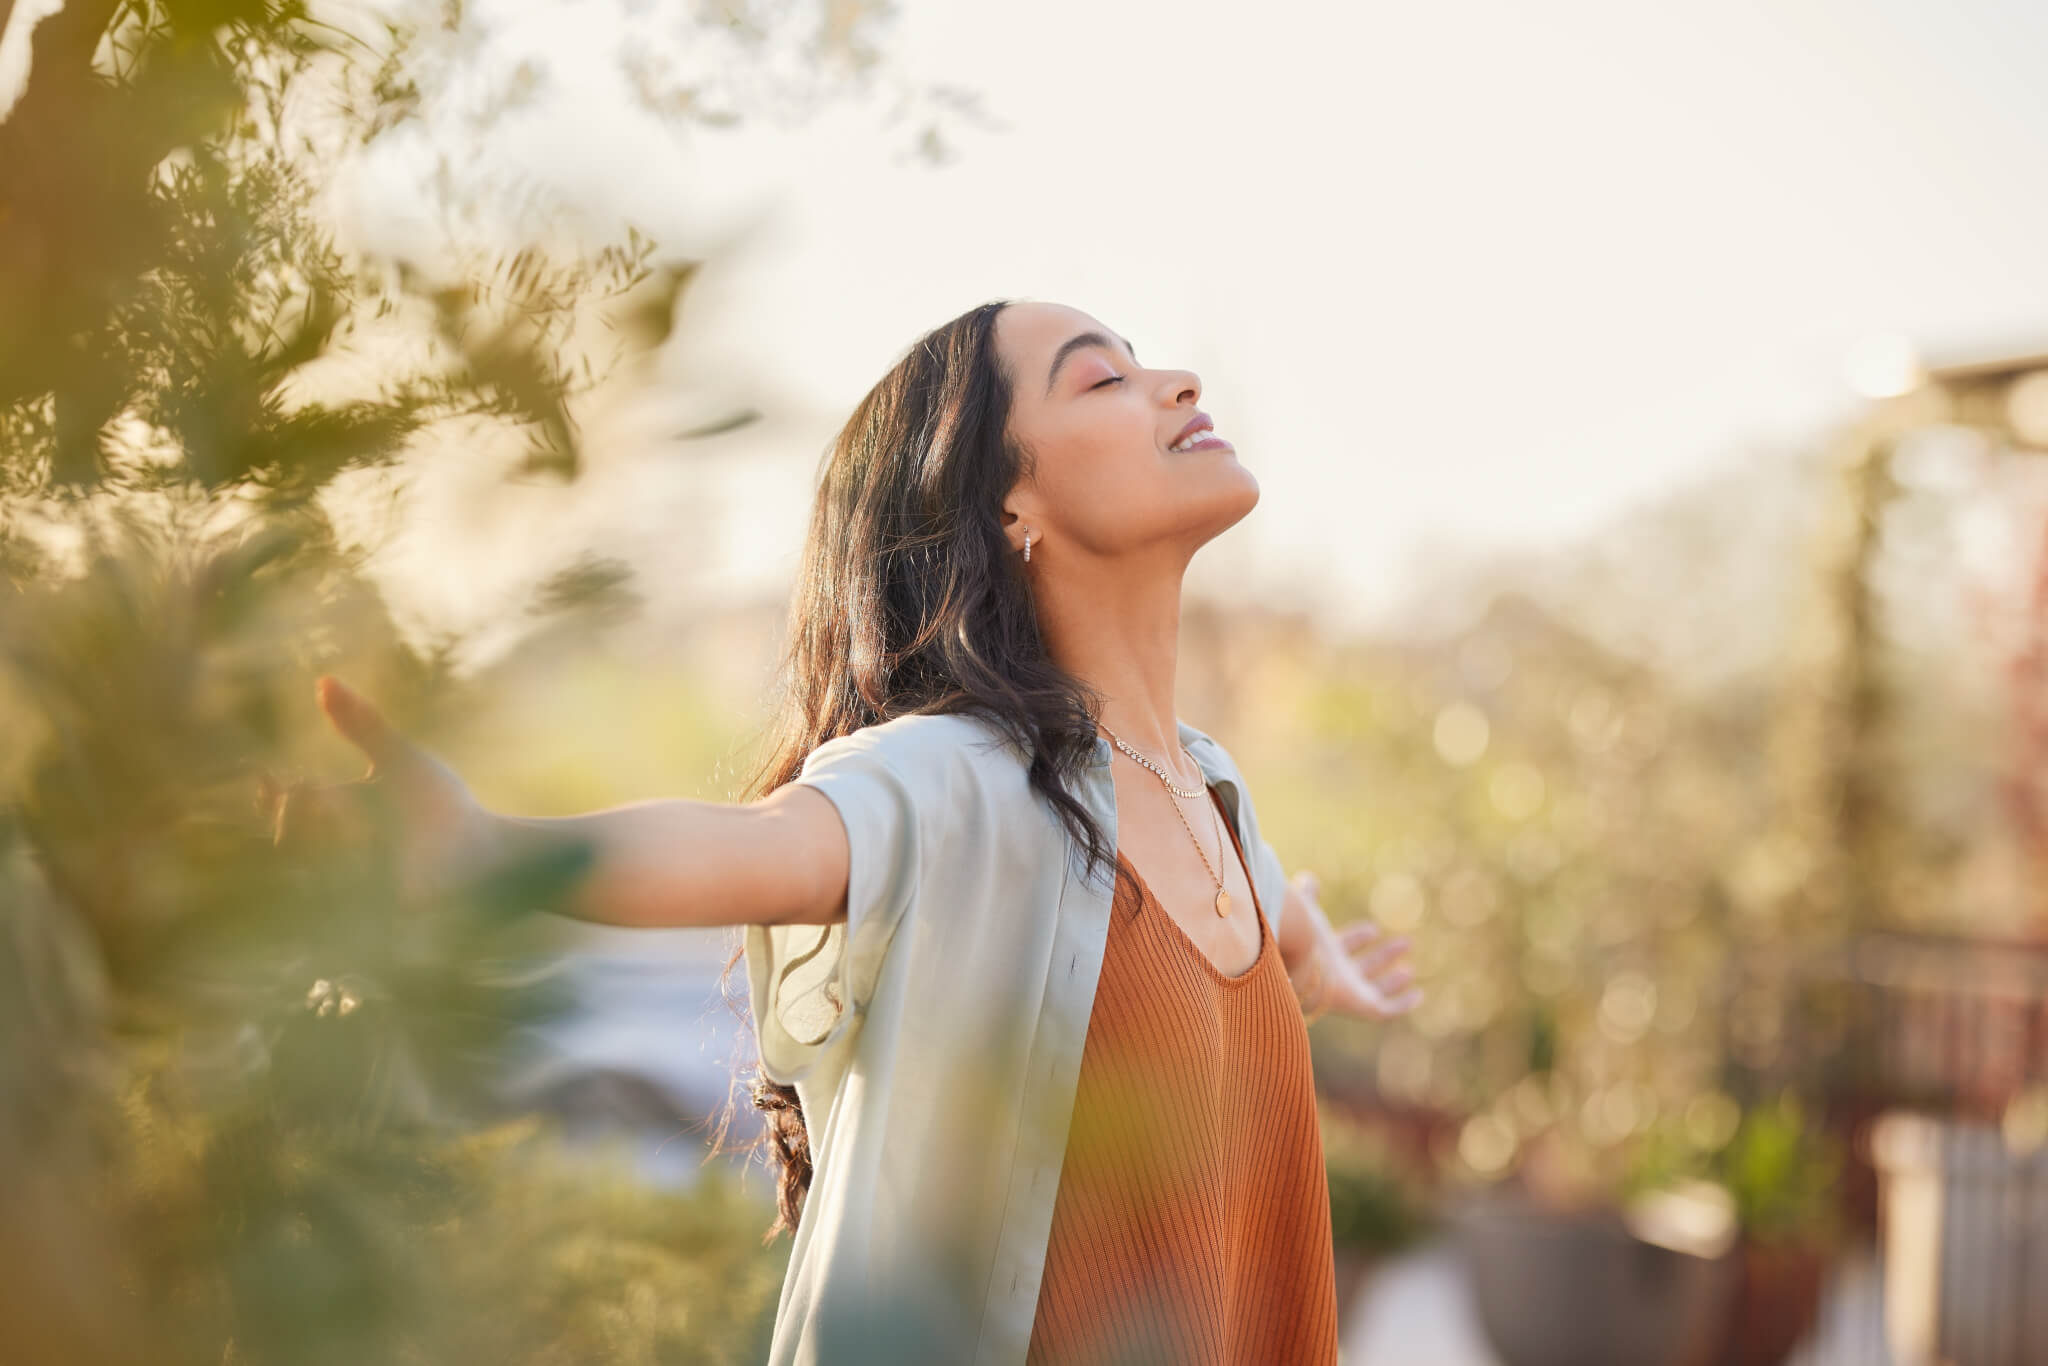 Woman practicing mindfulness or getting breath of fresh air outside